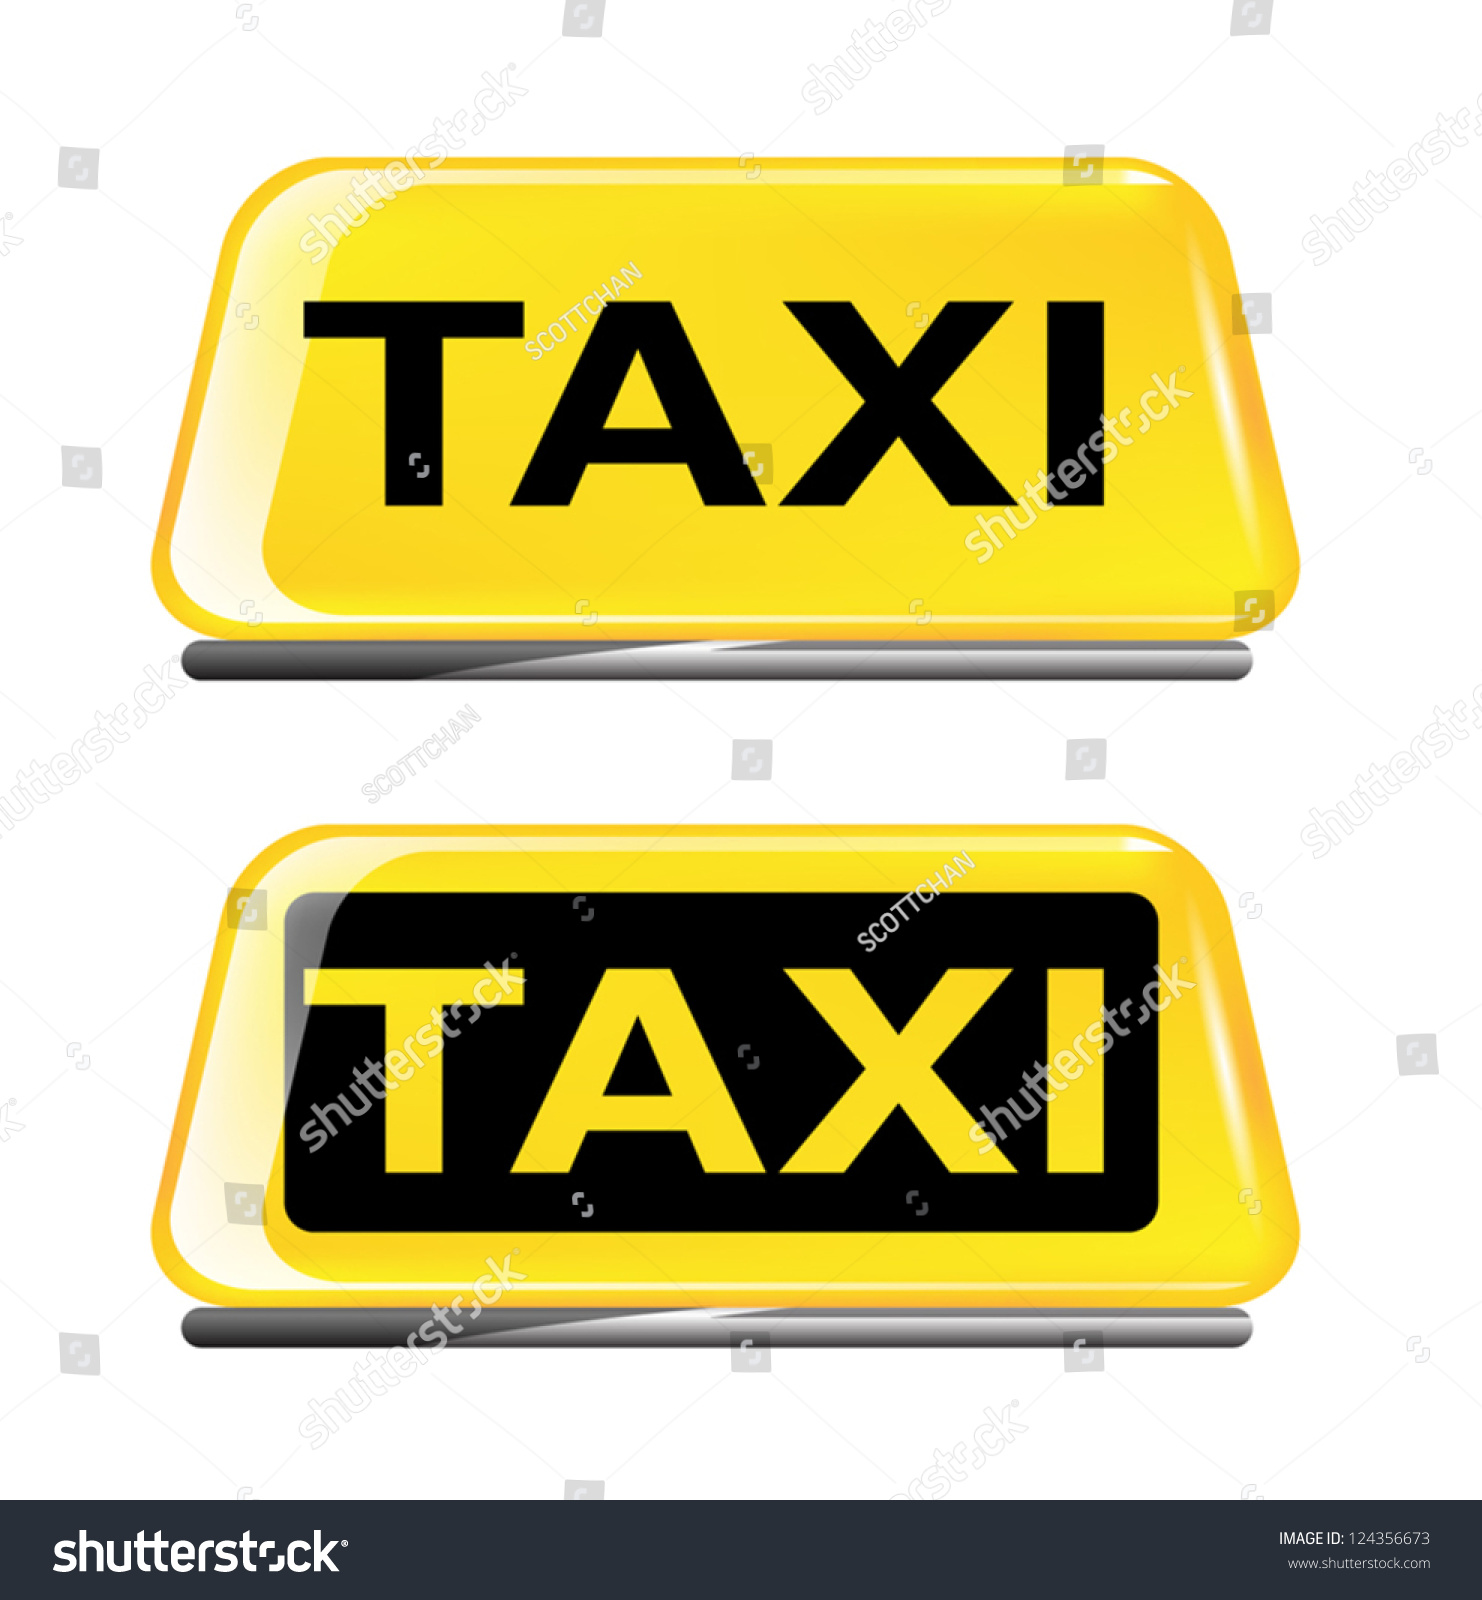 Taxi Sign On White Background Vector Stock Vector 124356673 ...